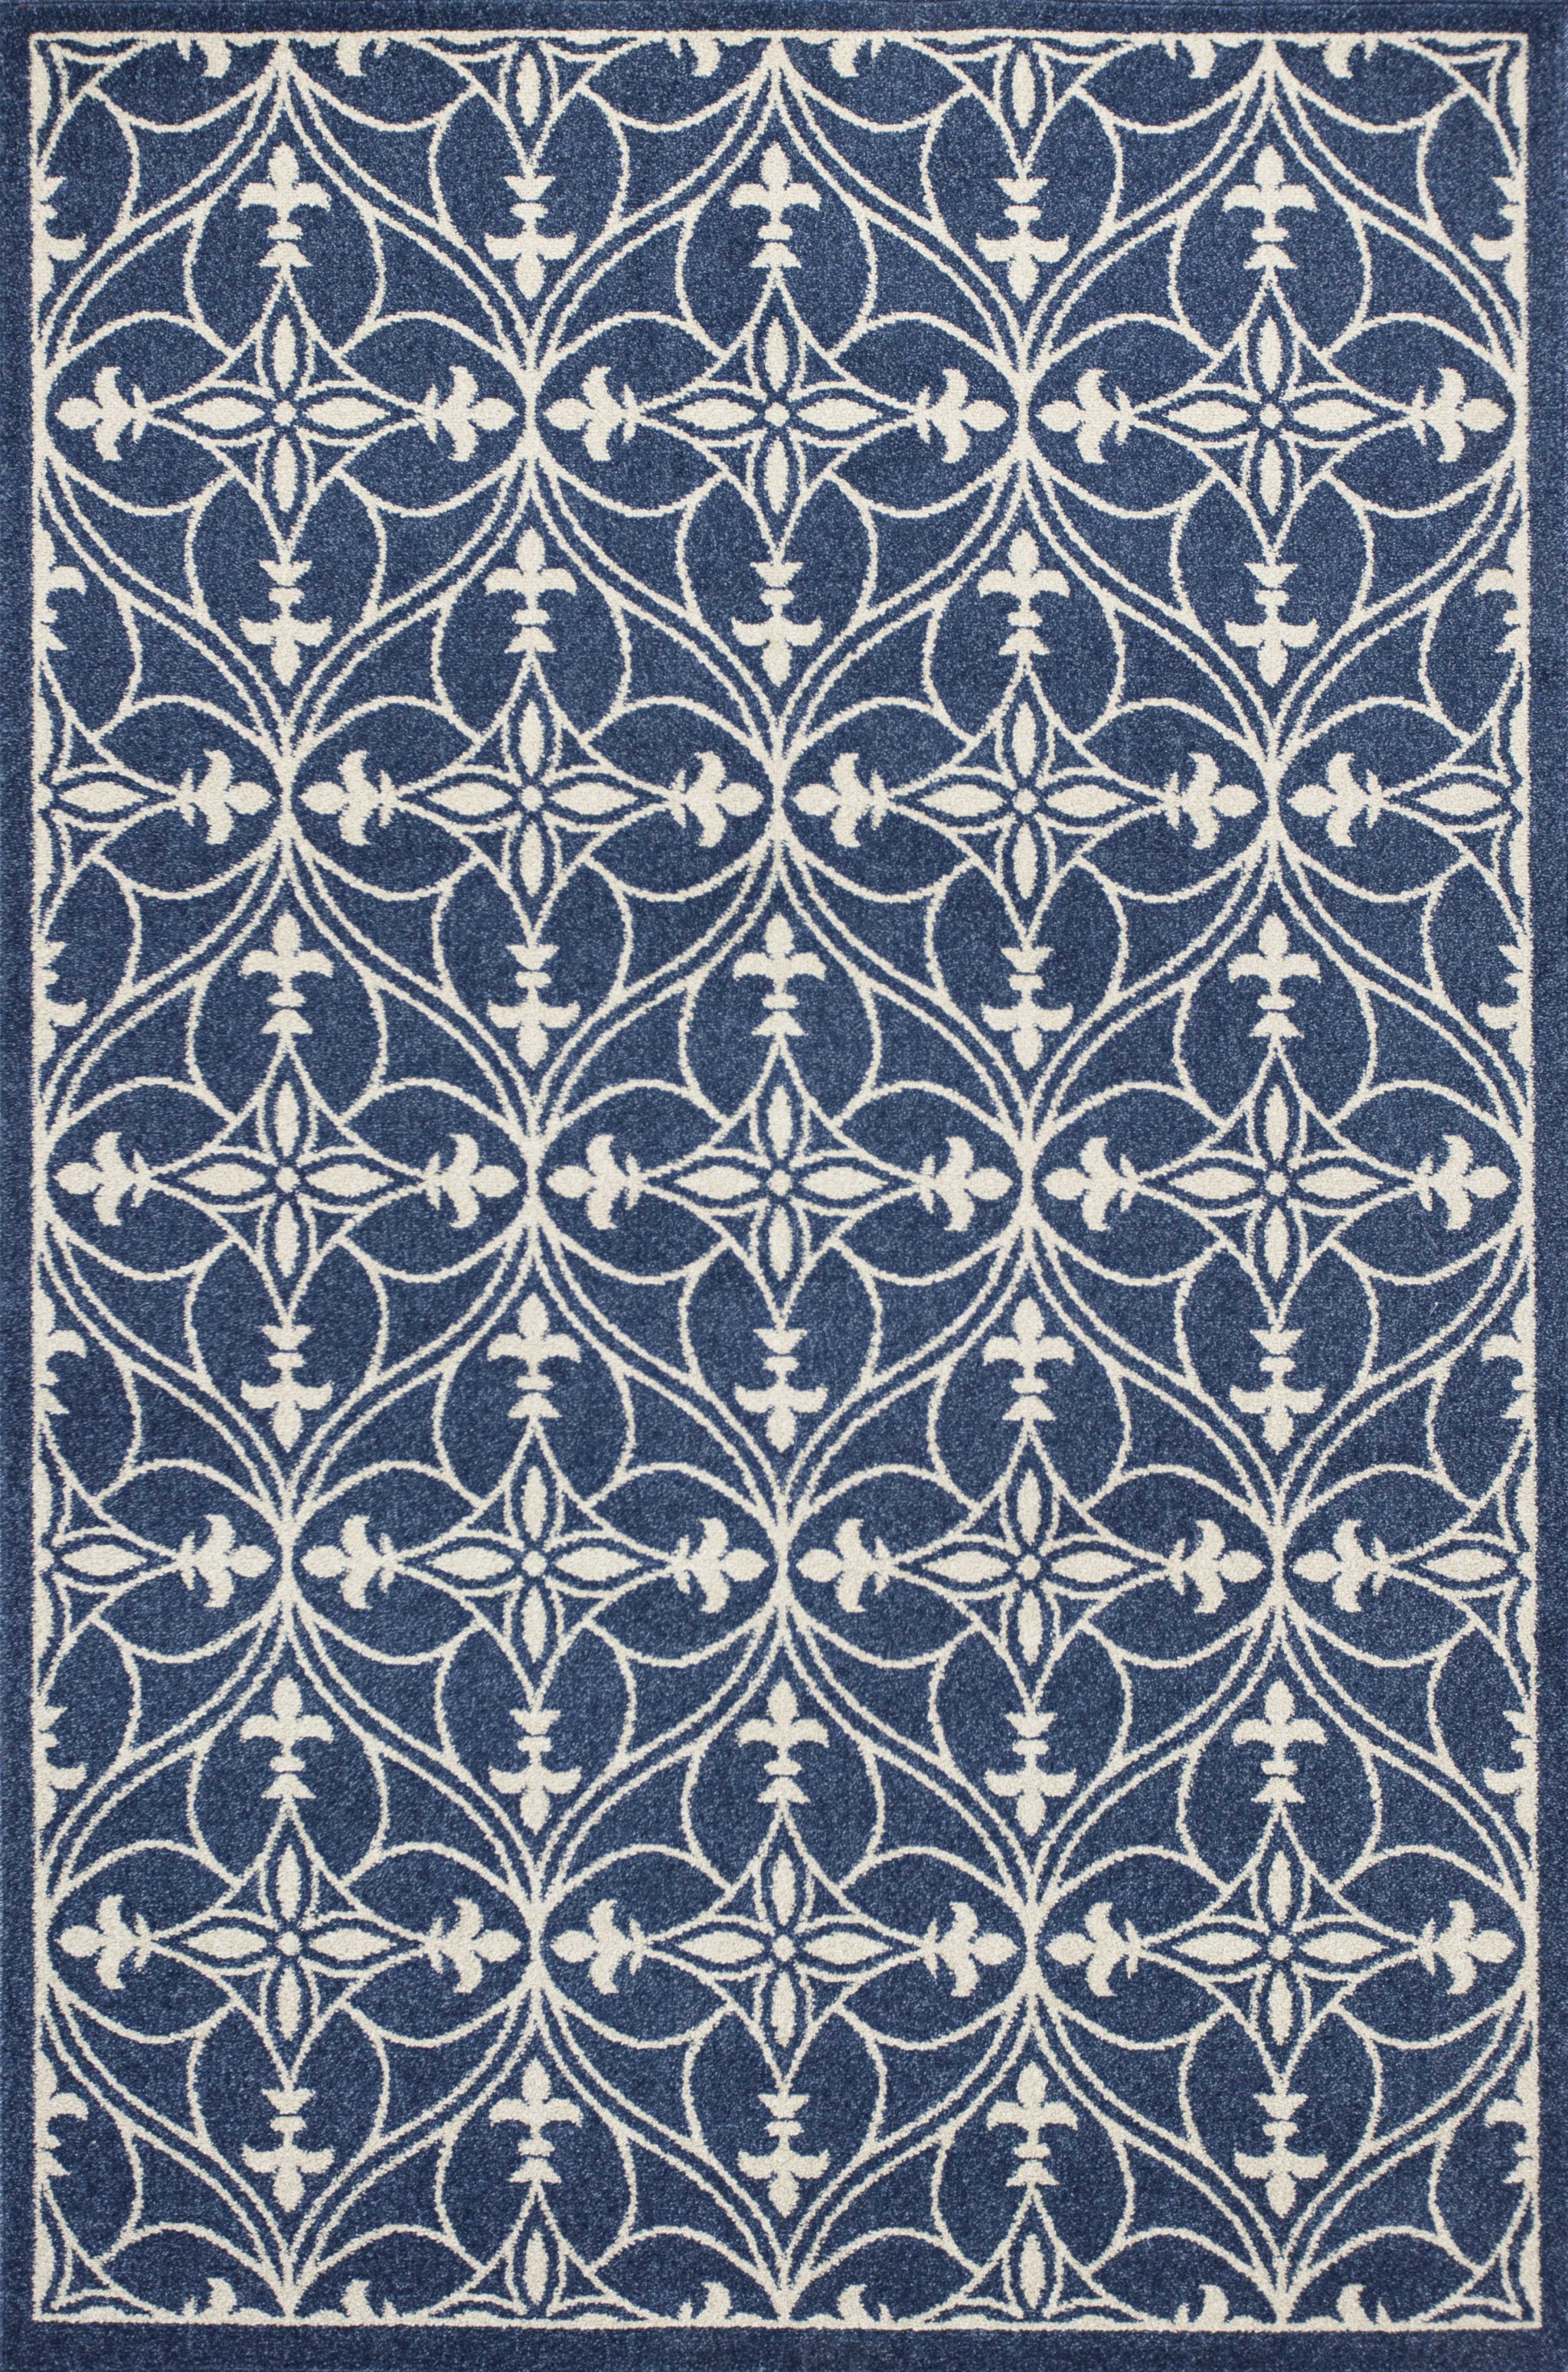 3' X 5' Blue and Ivory Area Rug-353456-1